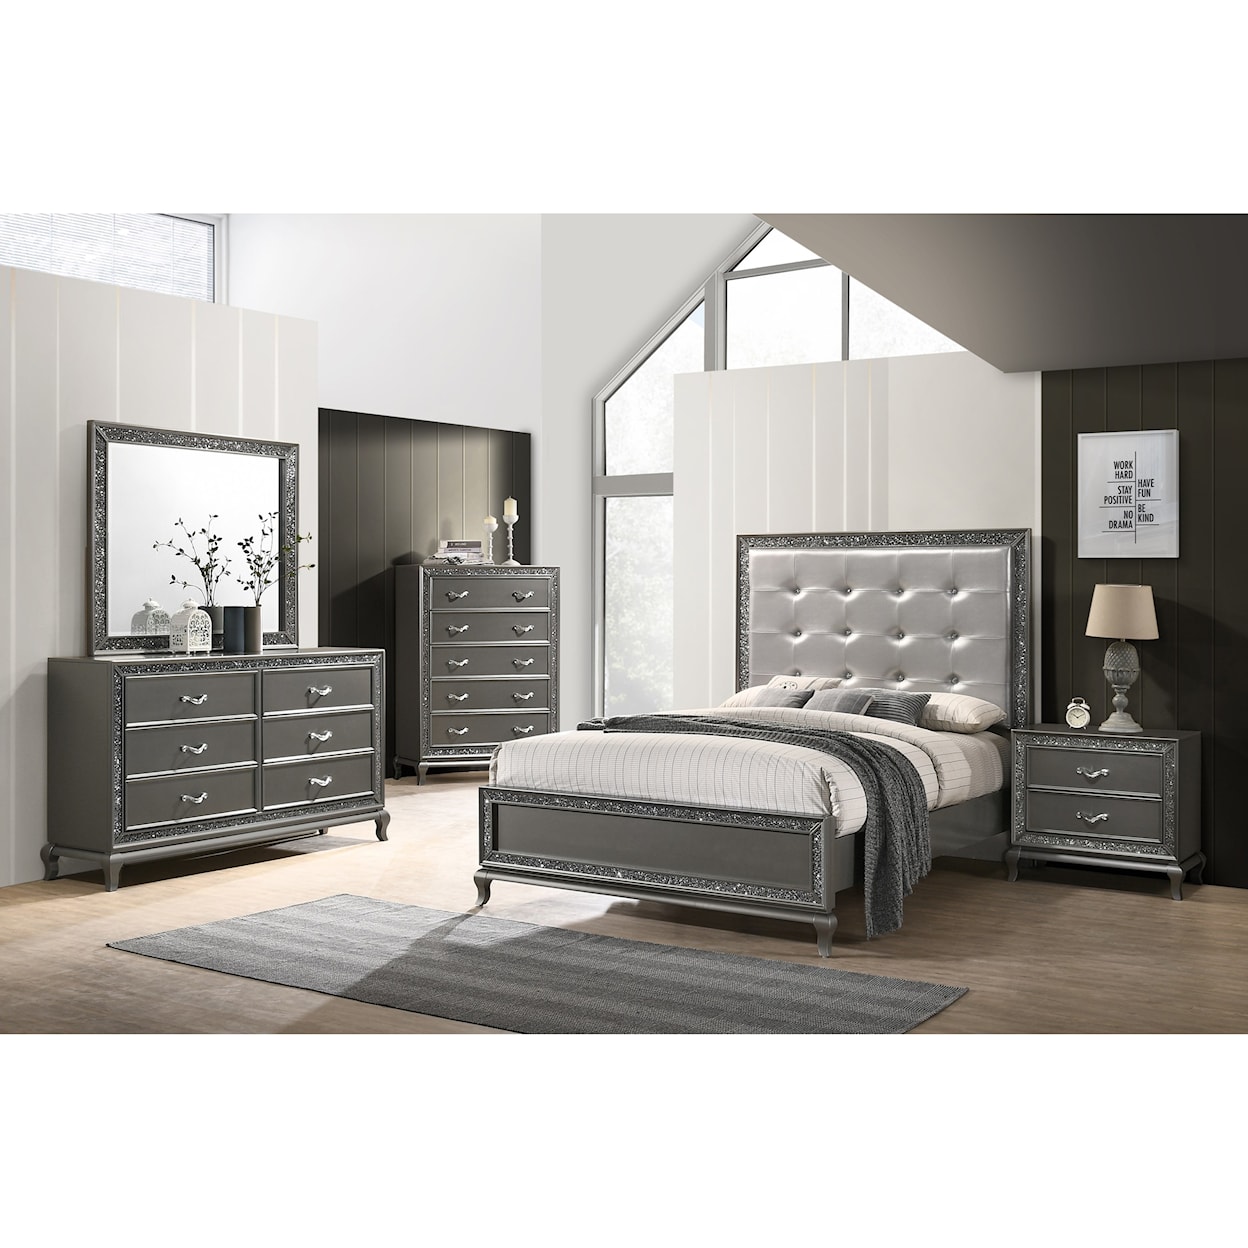 New Classic Furniture Park Imperial Twin Bedroom Group